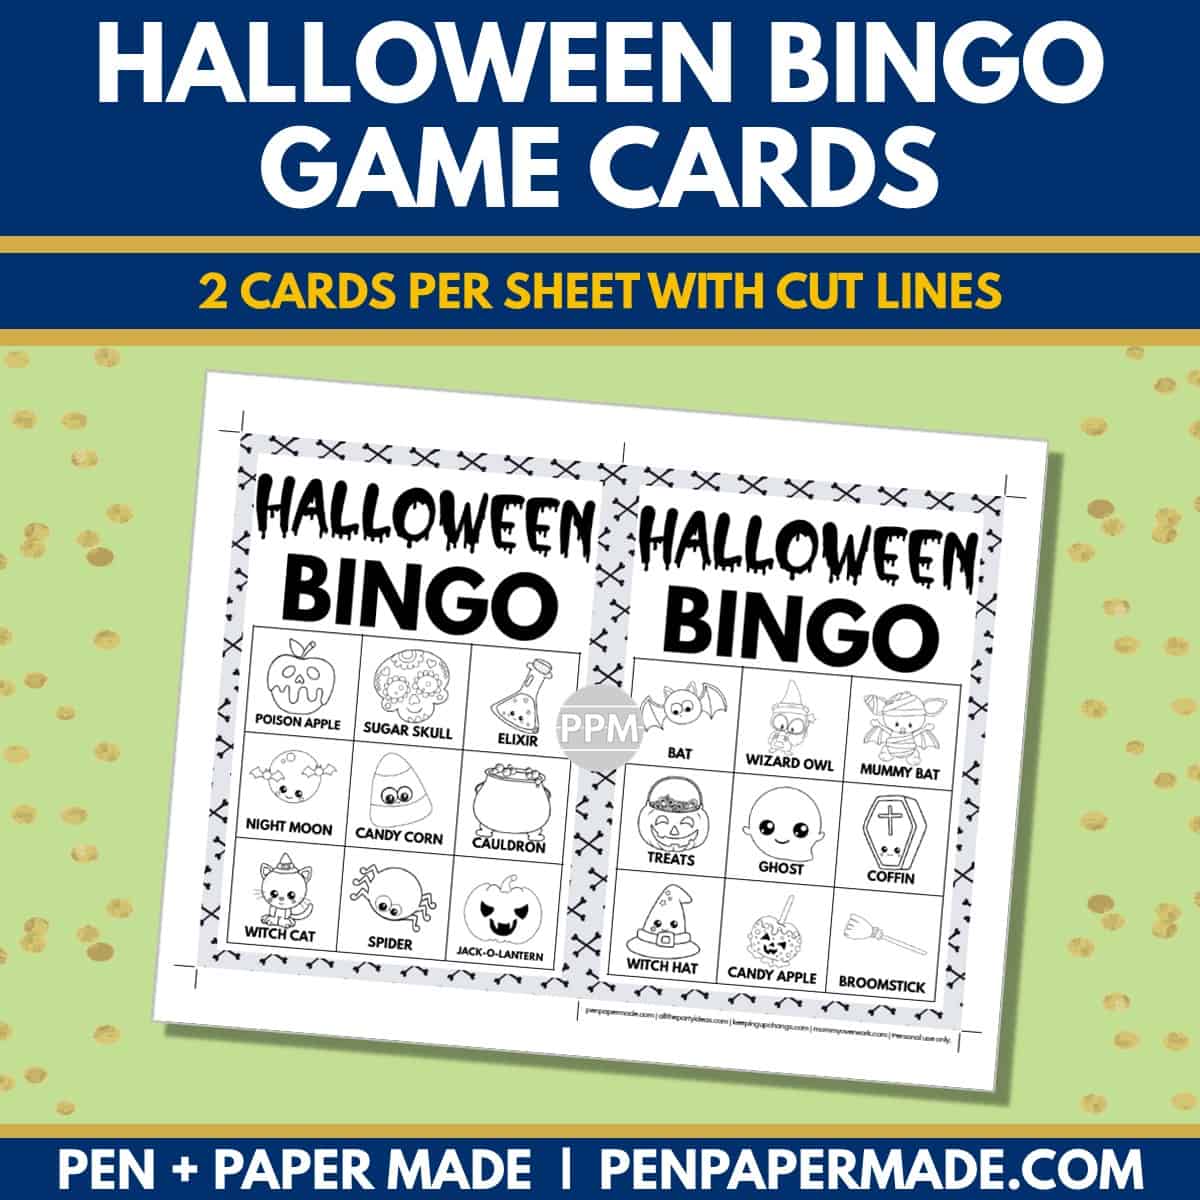 halloween bingo card 3x3 5x7 game boards with images and text words.